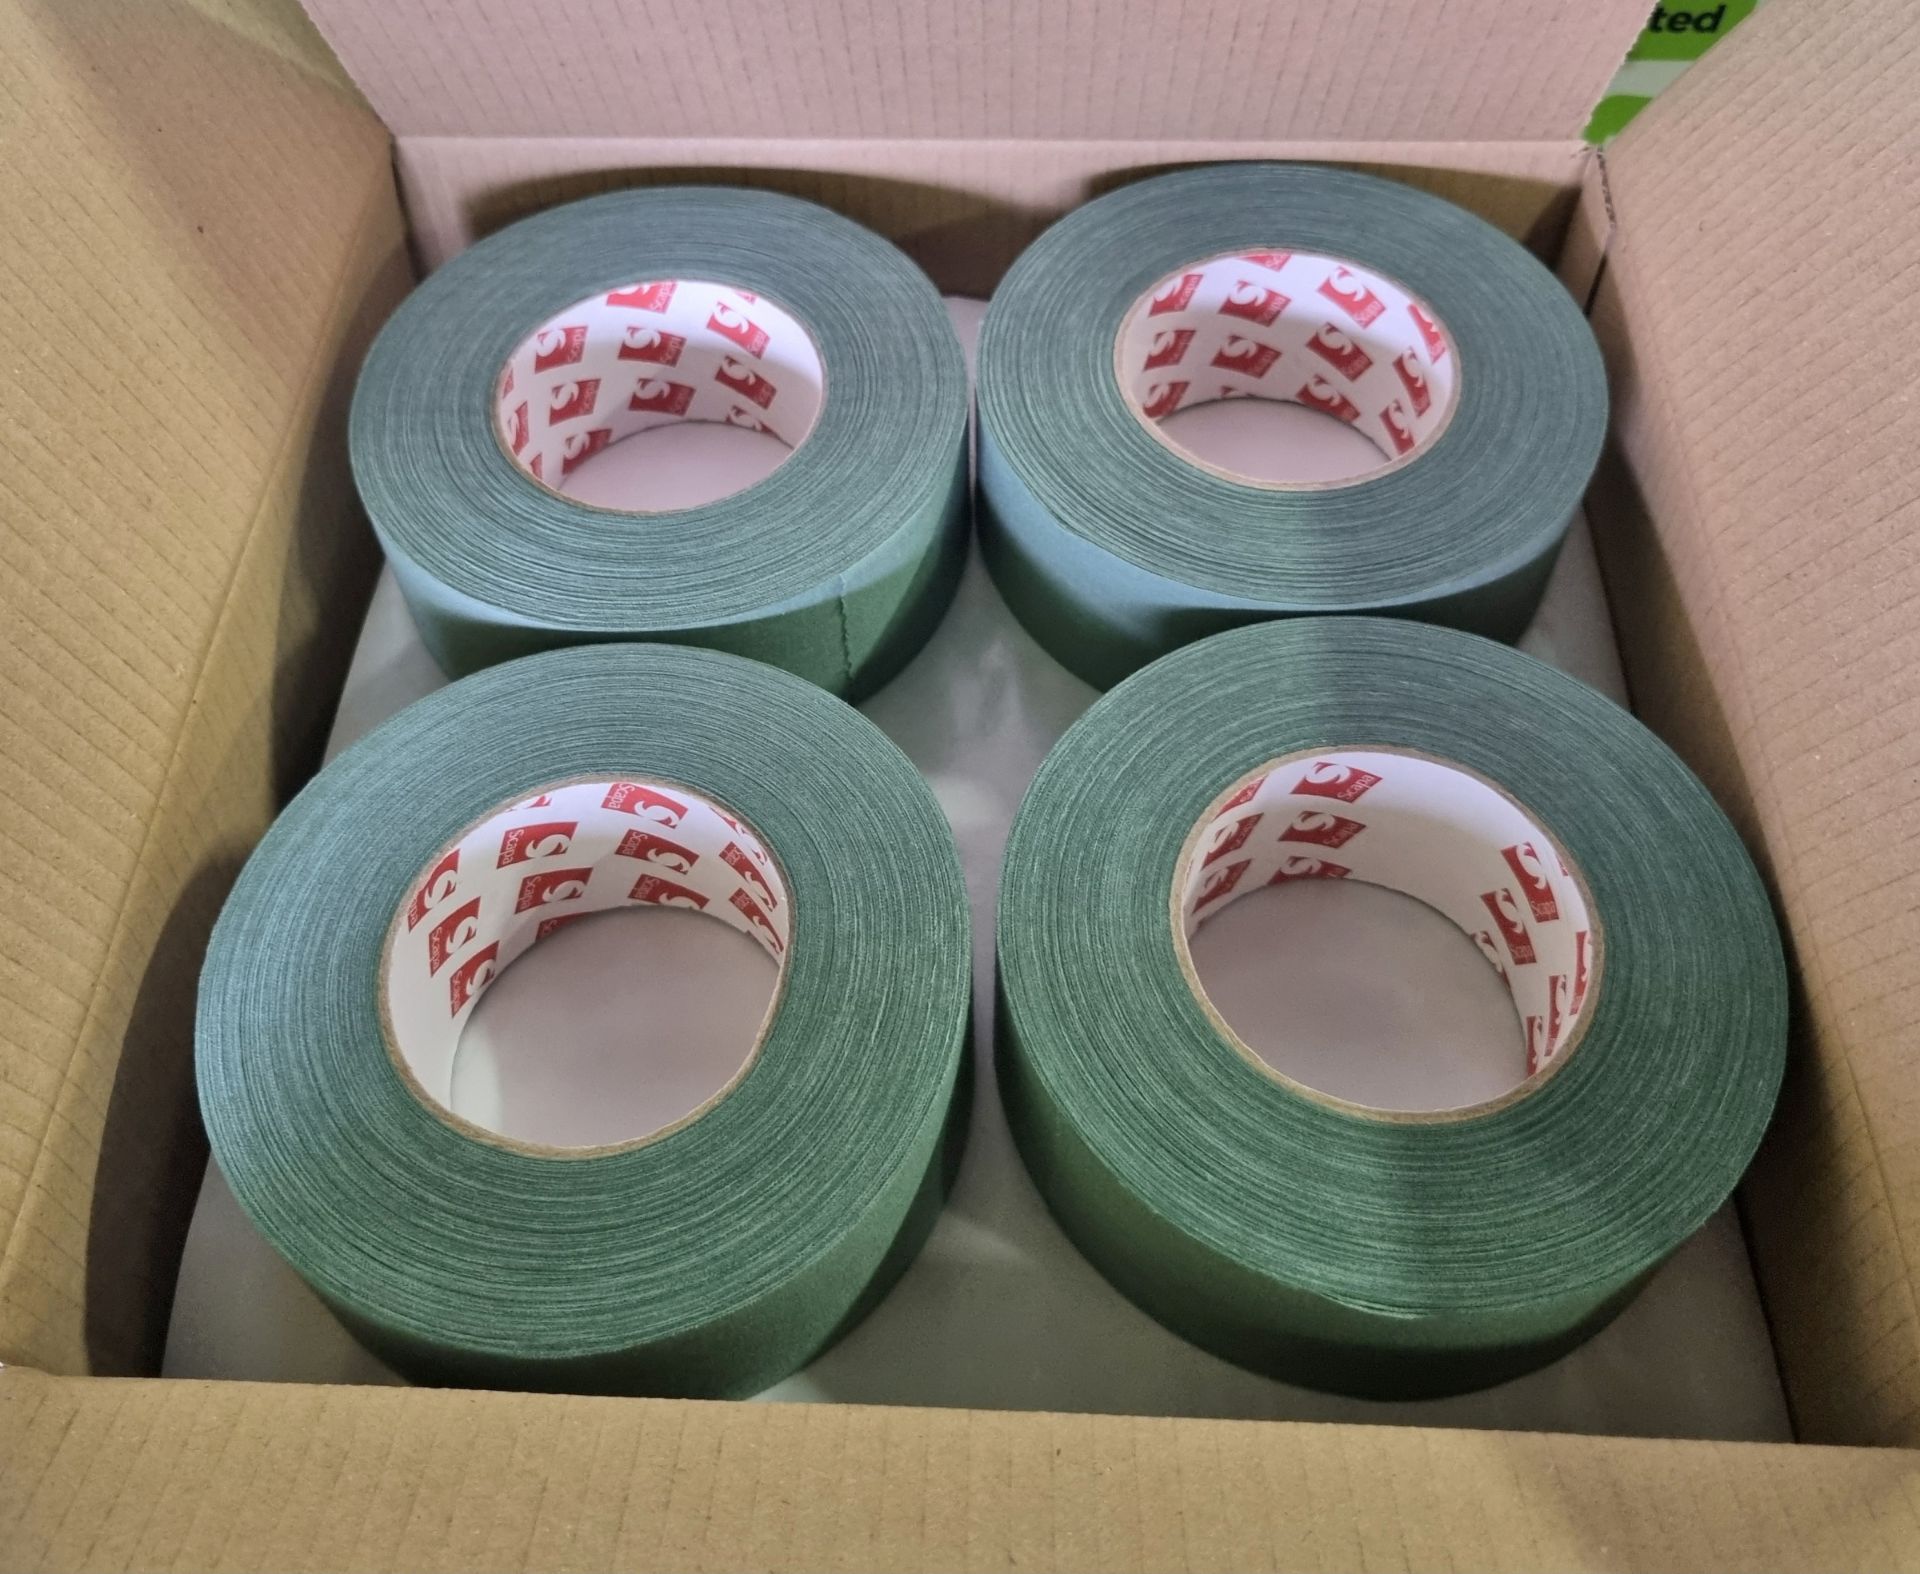 2x boxes of Scapa 3302 uncoated cotton cloth adhesive tape - olive green - 50mm x 50m - Image 3 of 4